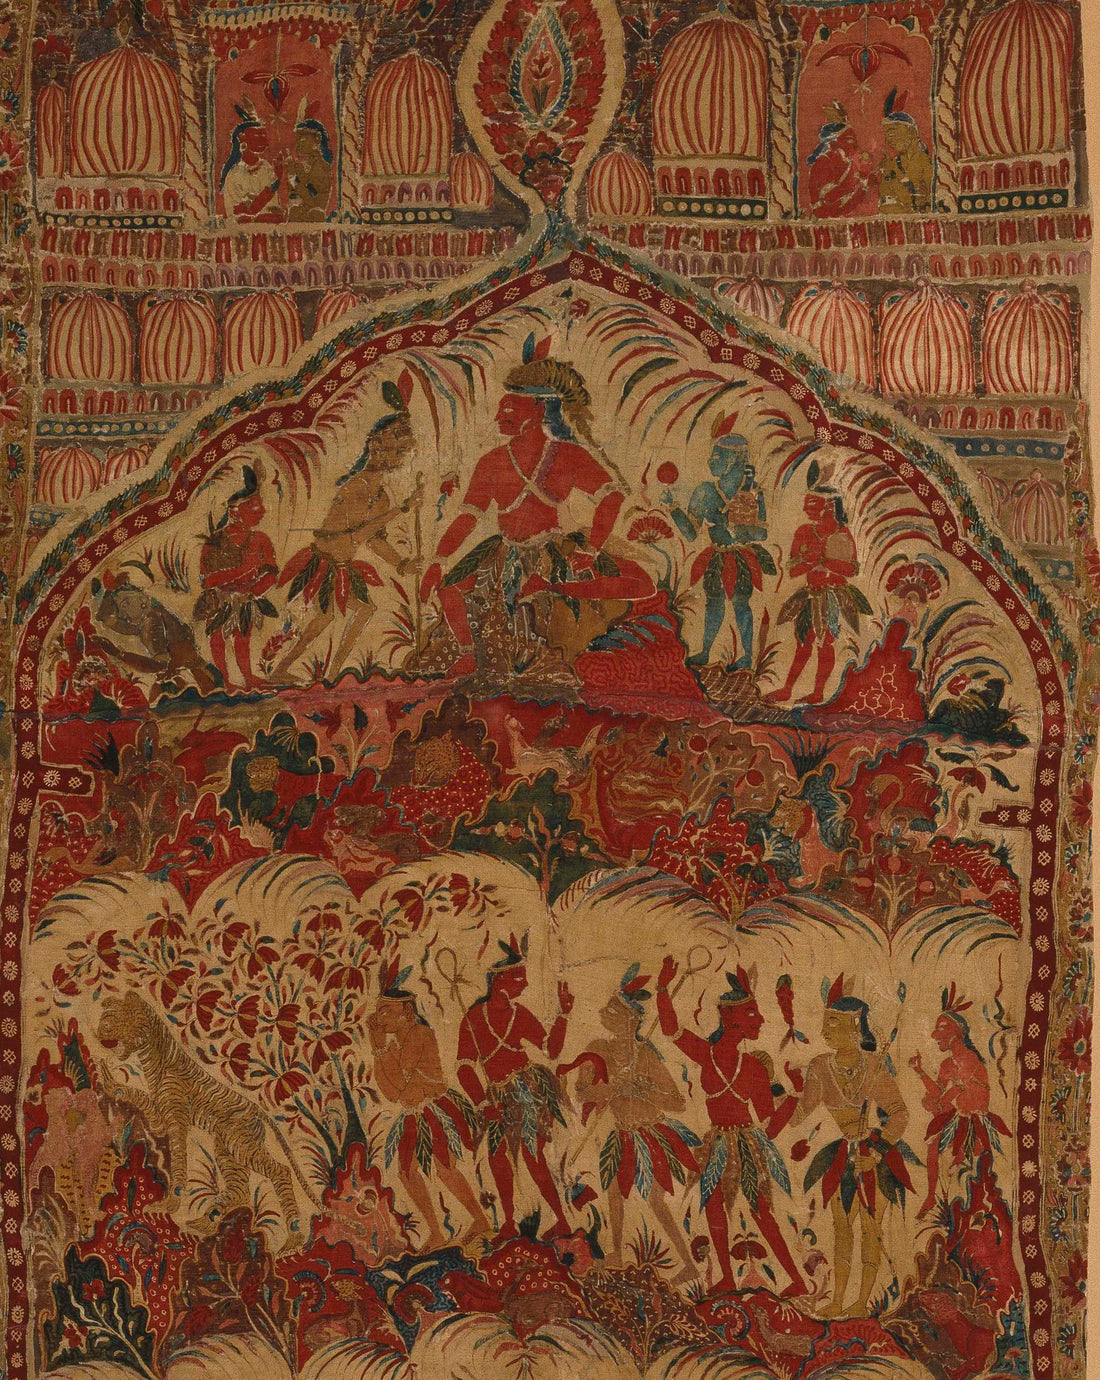 Pulicat workshop, fragment of a wall hanging depicting forest-dwelling people, c. 1610-1620 Brooklyn Museum (14.719.6) Photo Brooklyn Museum